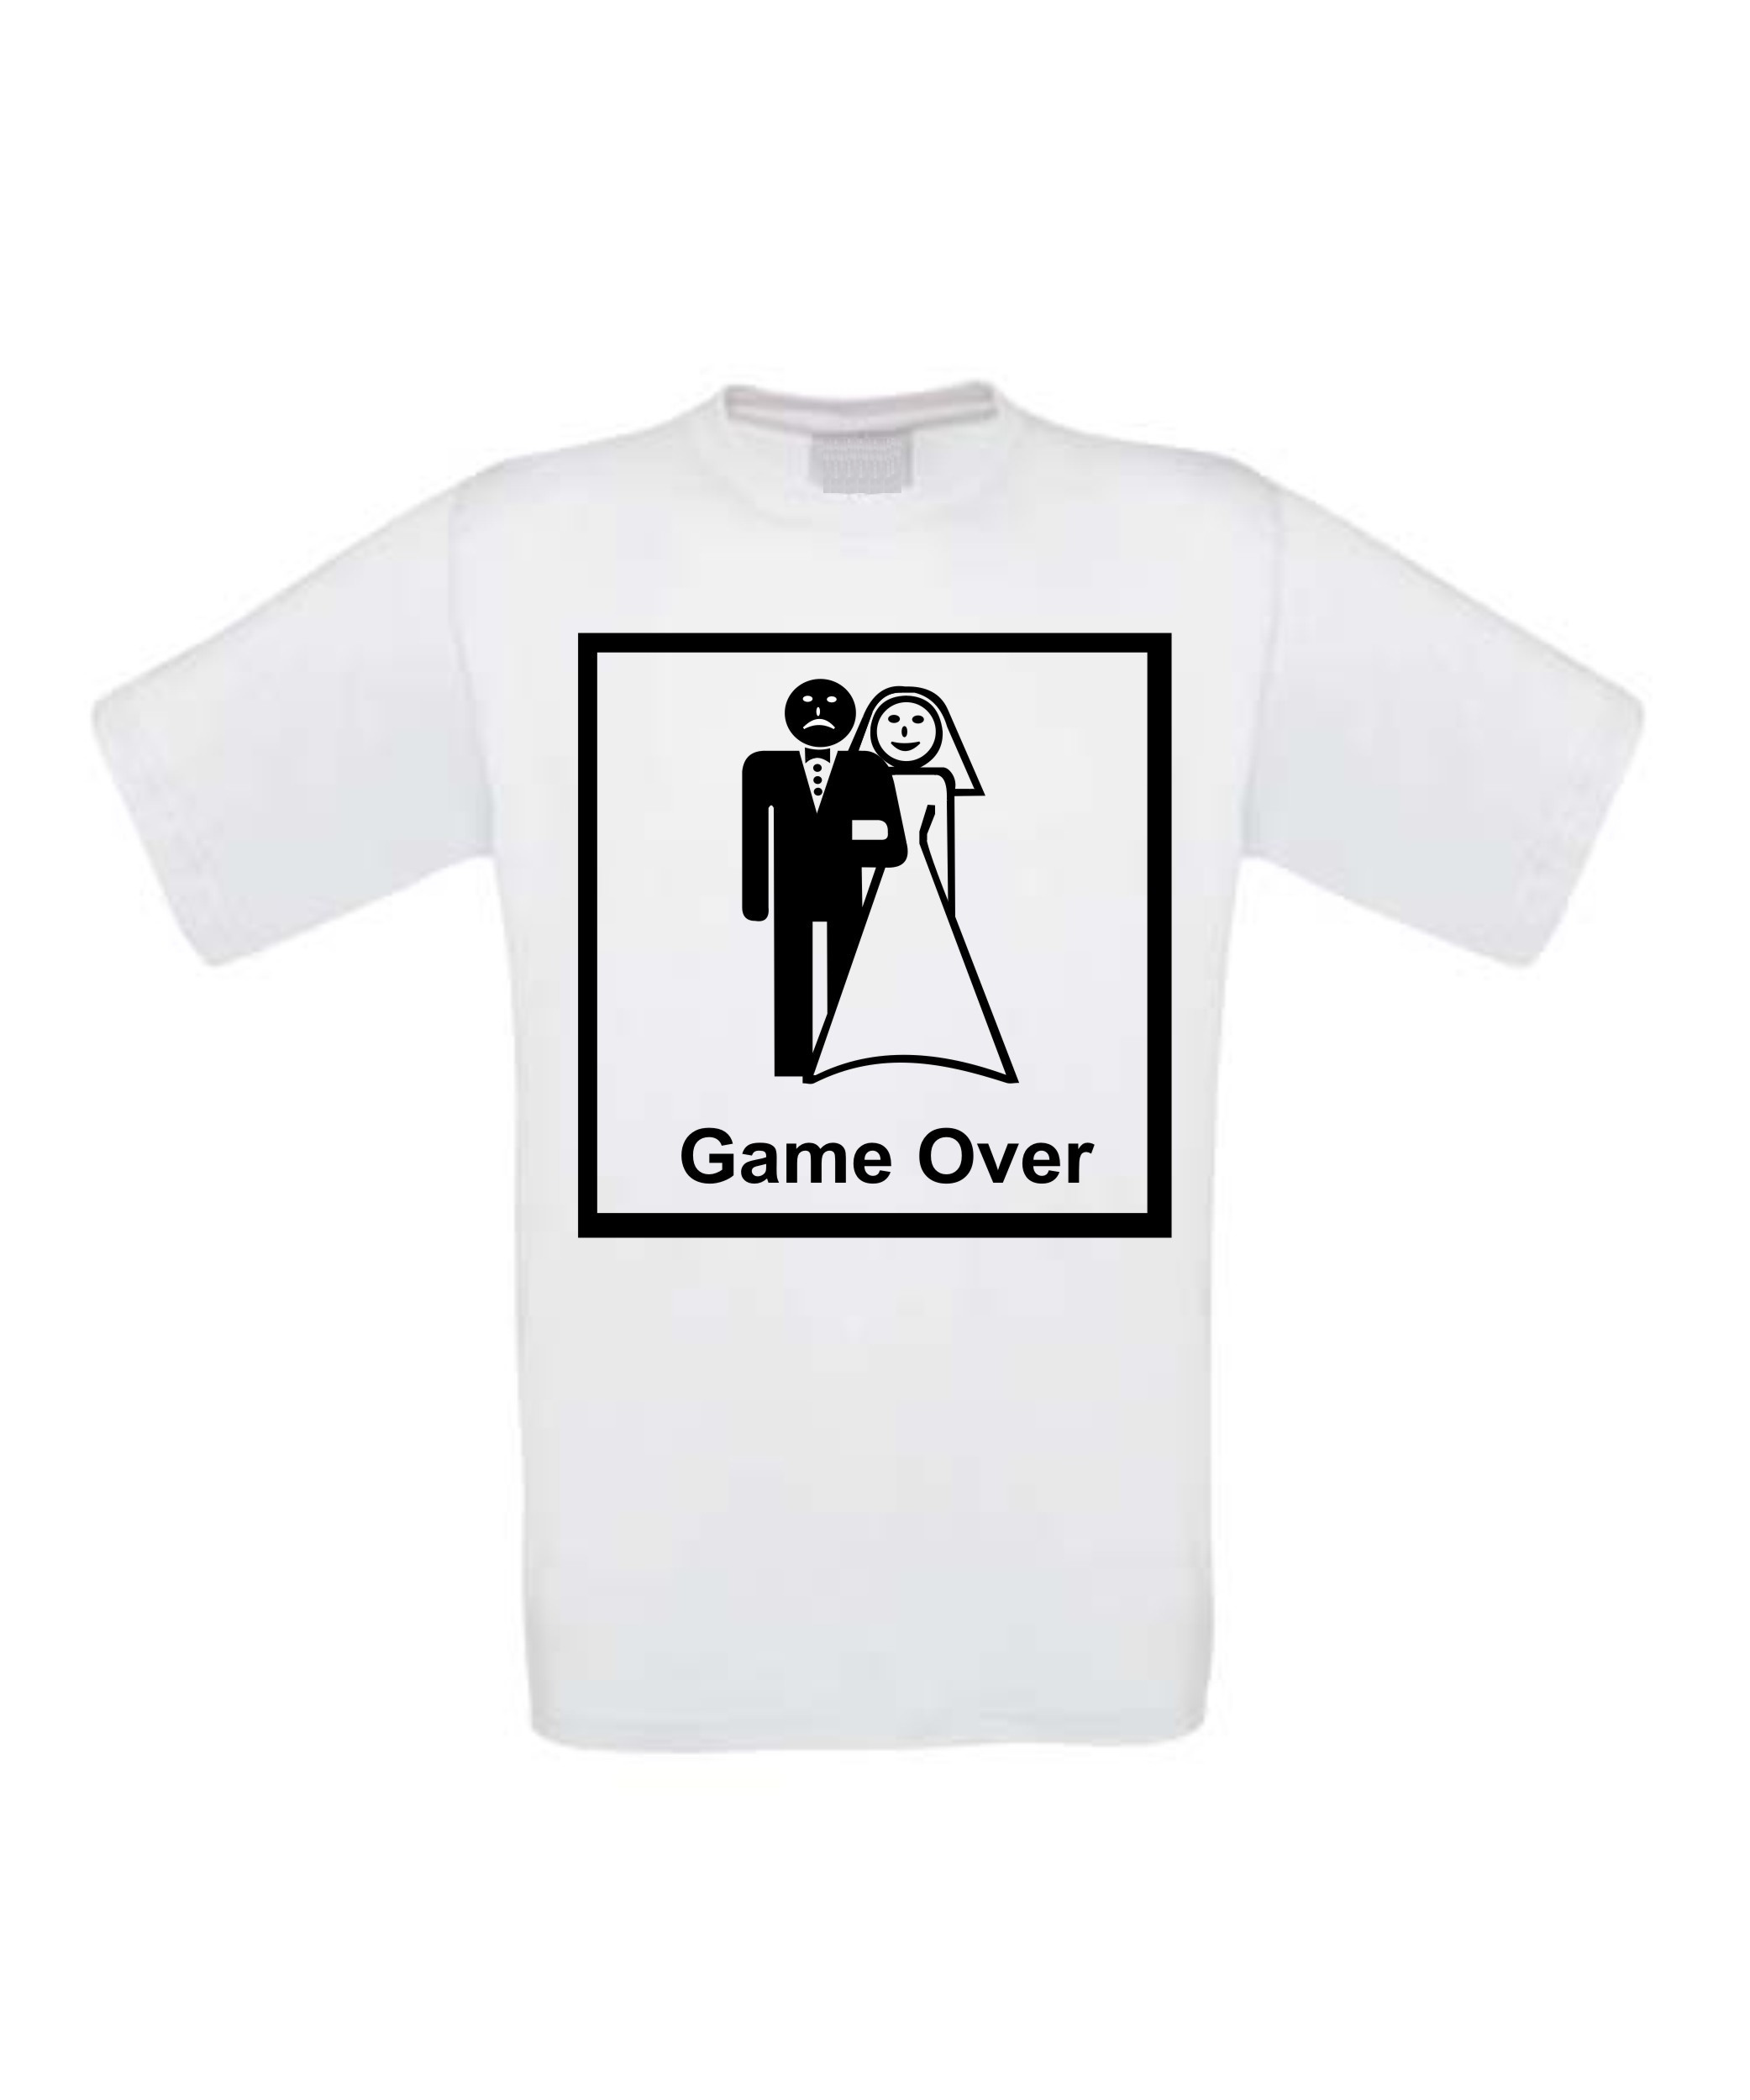 Game over t-shirt